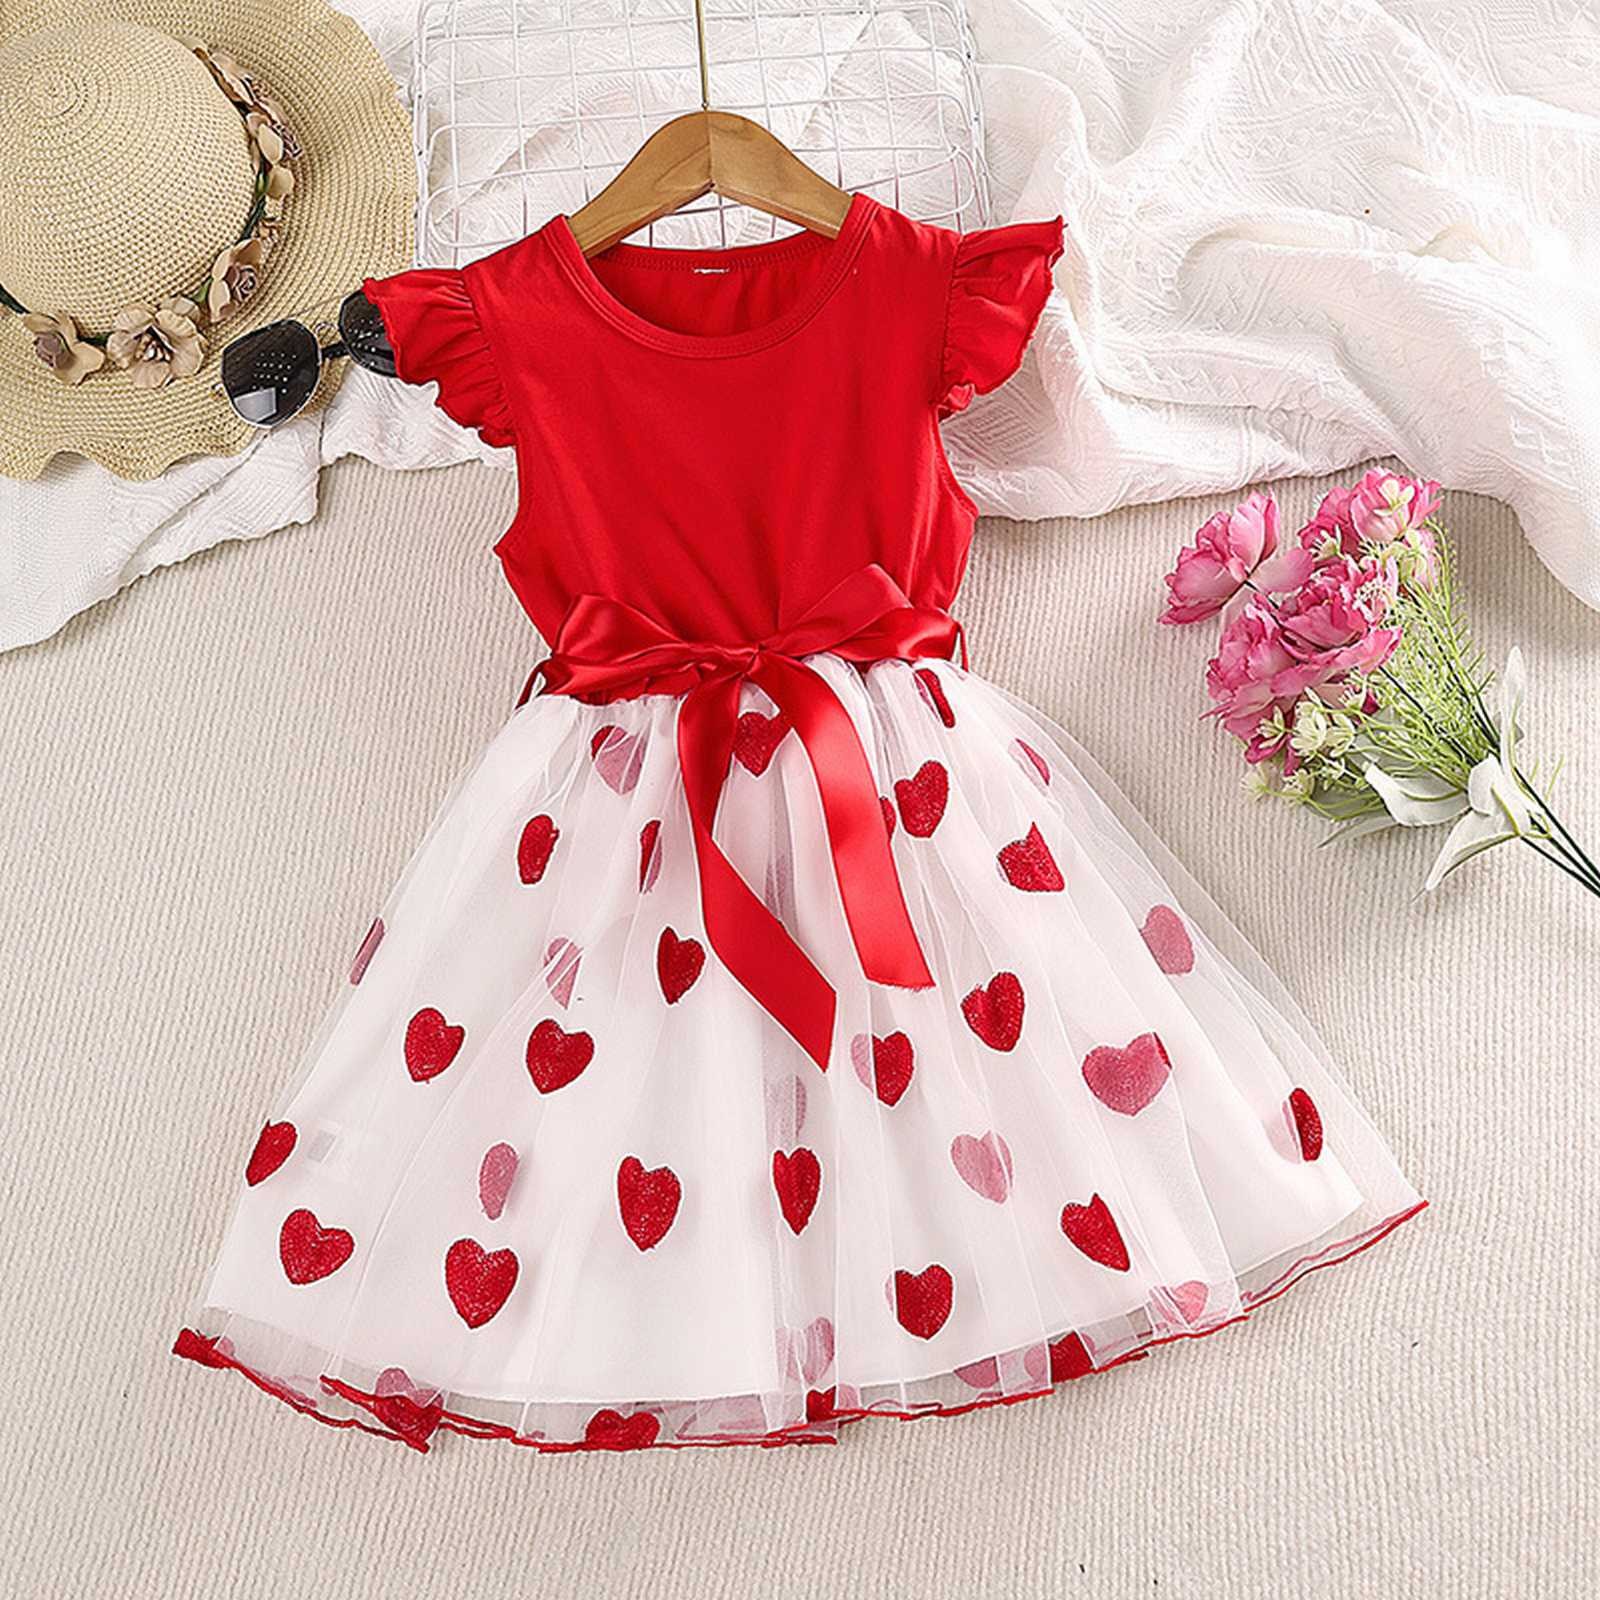 Girls Fashion Dresses 3 To 7 Years Old Party Dress Heart Print ...